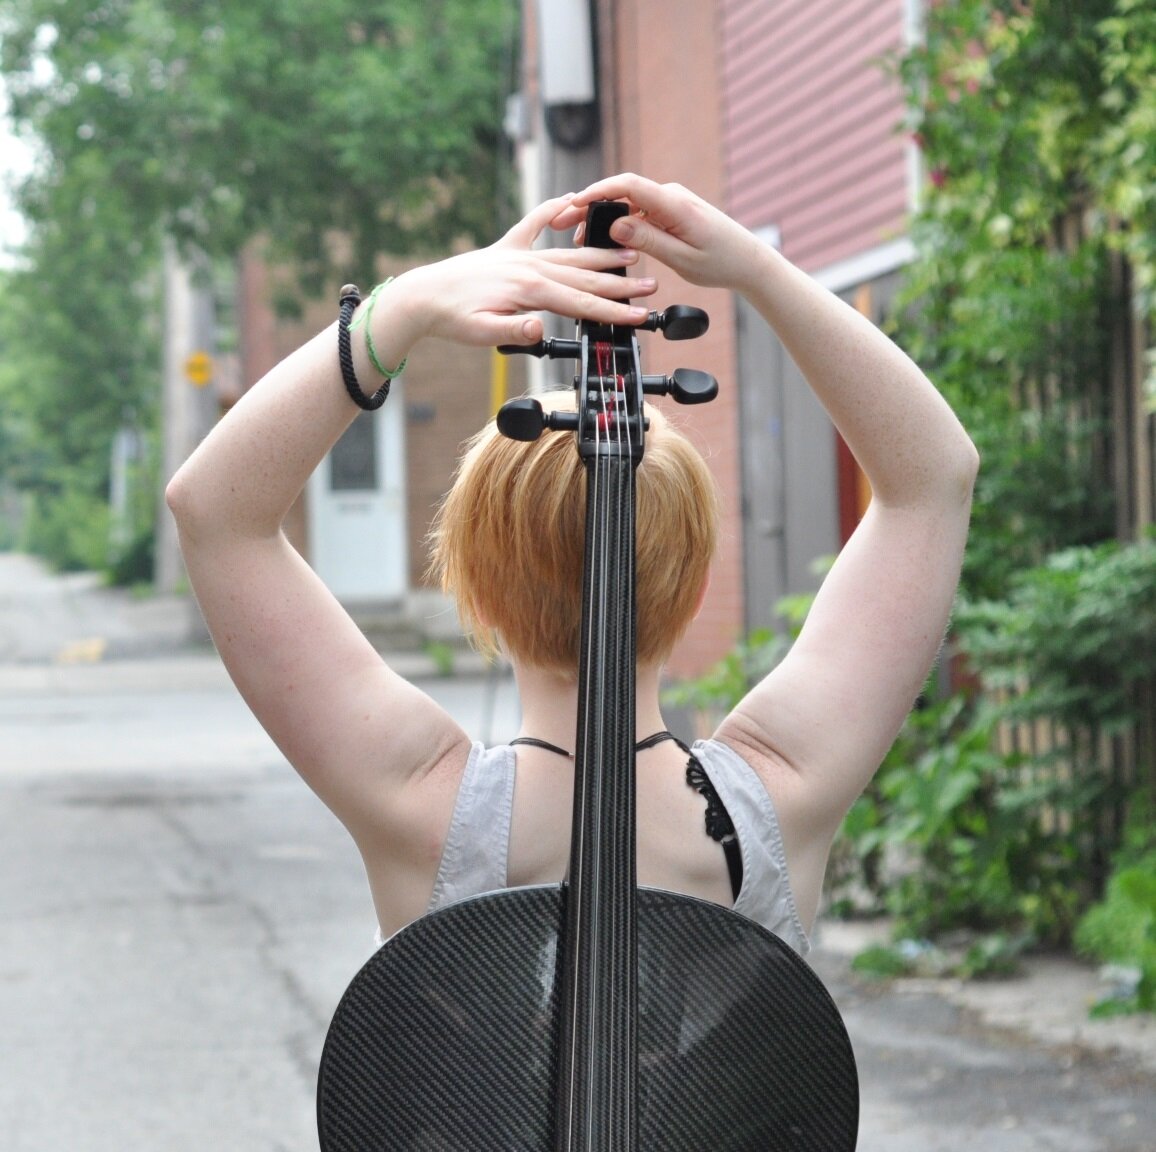 'The meaning of life is to find your gift. The purpose of life is to give it away.' - Picasso. 

So, I take my cello outside.